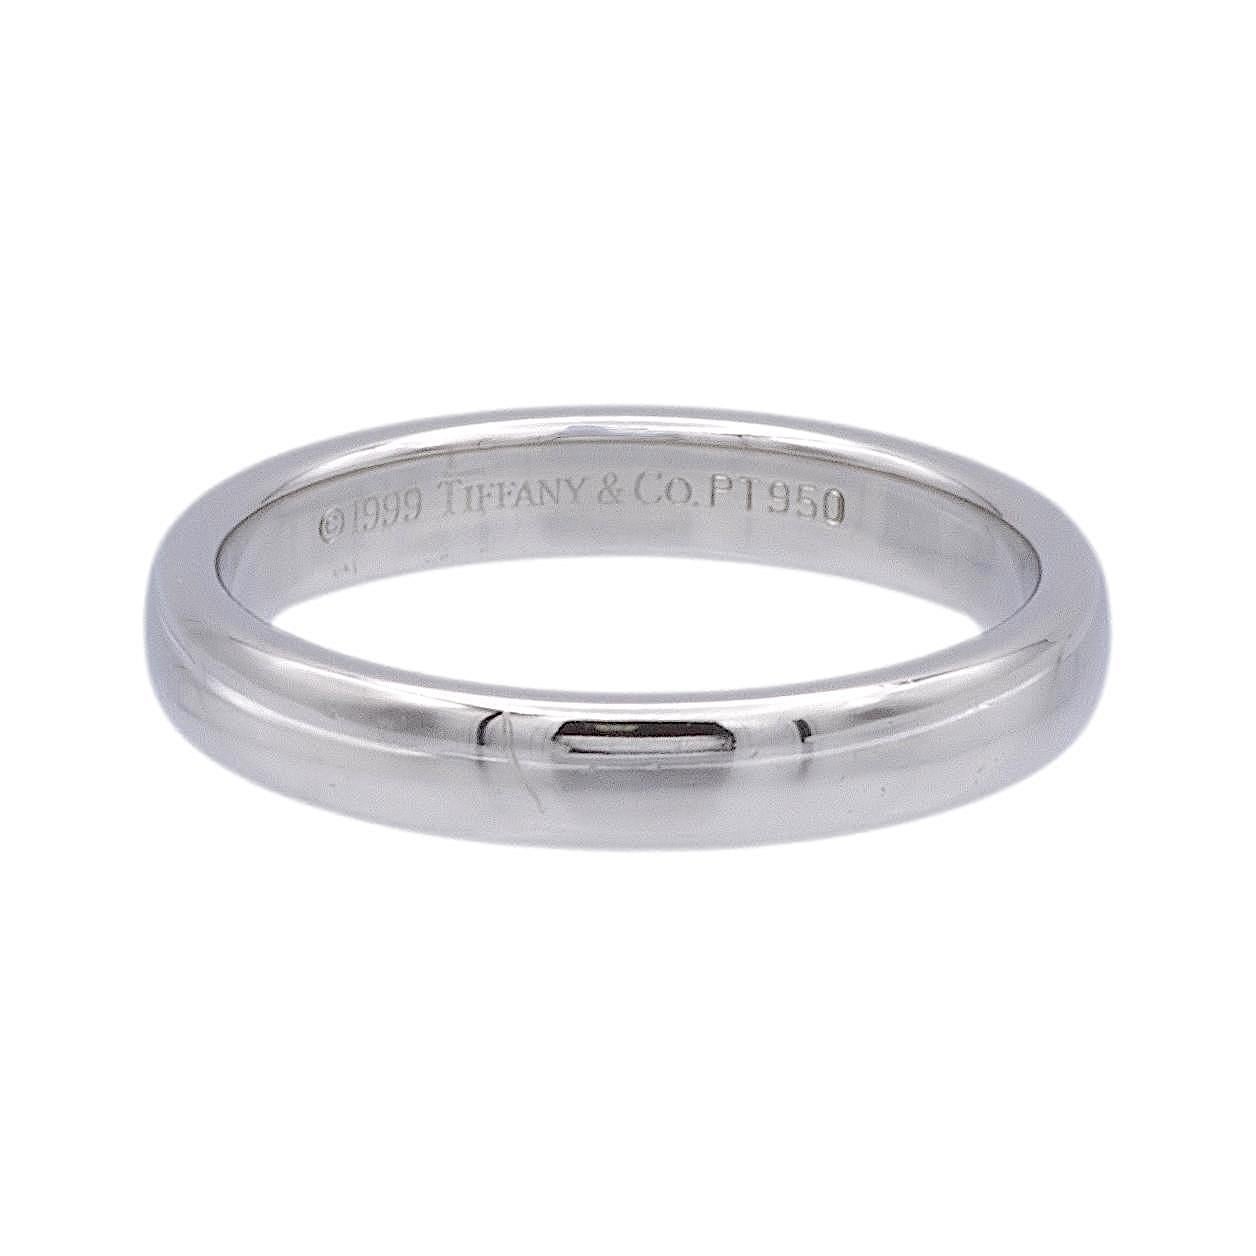 Vintage Tiffany & Co. 3mm Classic wedding band ring finely crafted in platinum. Made in 1999. Fully hallmarked with logo and metal content.
 
Ring Specifications
Brand: Tiffany & Co.
Style: Classic (comfort-fit)
Hallmarks: © 1999 Tiffany & Co.